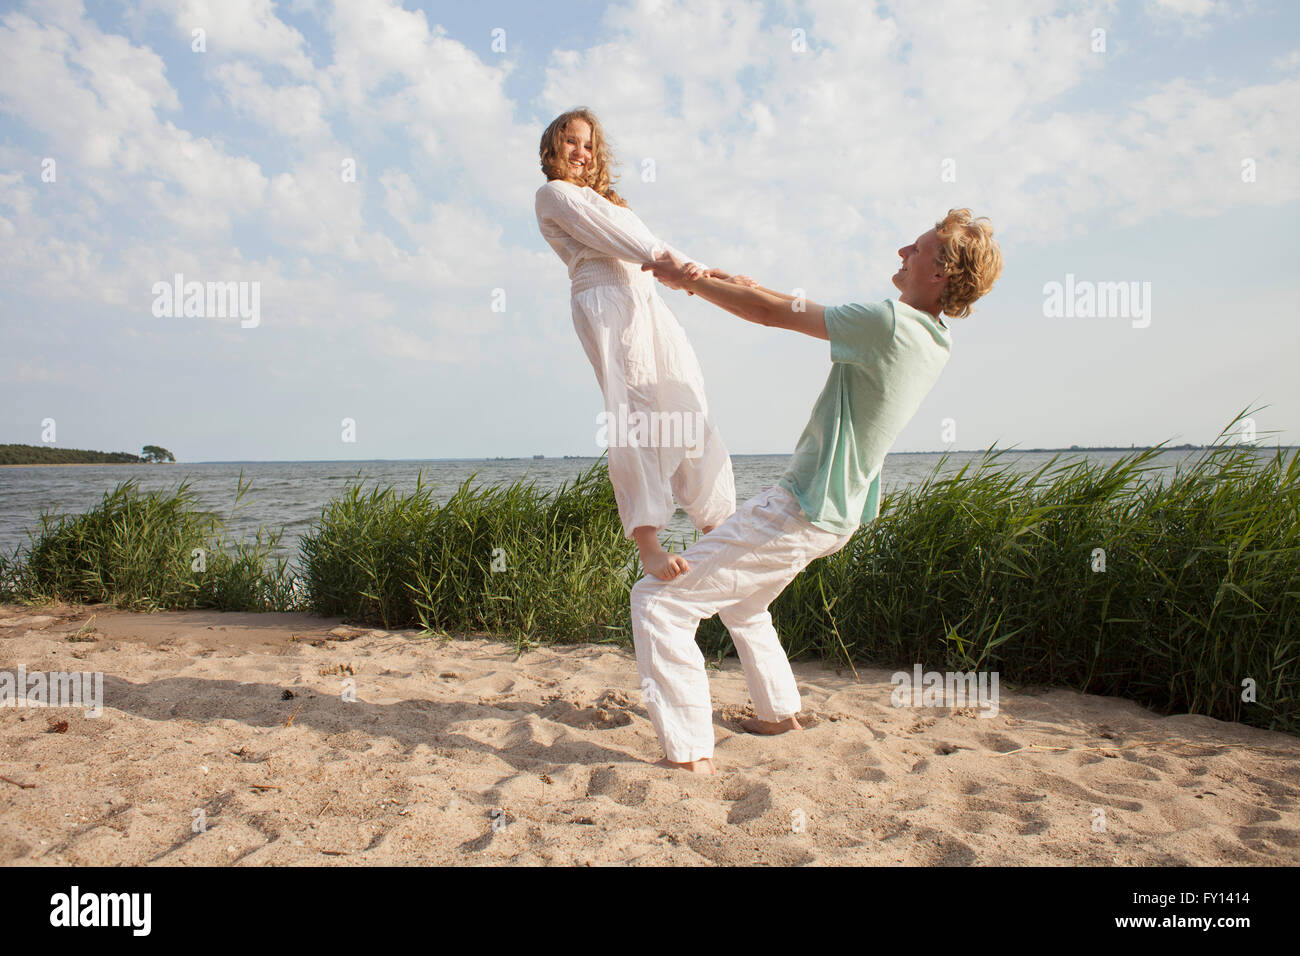 Woman balancing on friend's knee at beach against sky Stock Photo